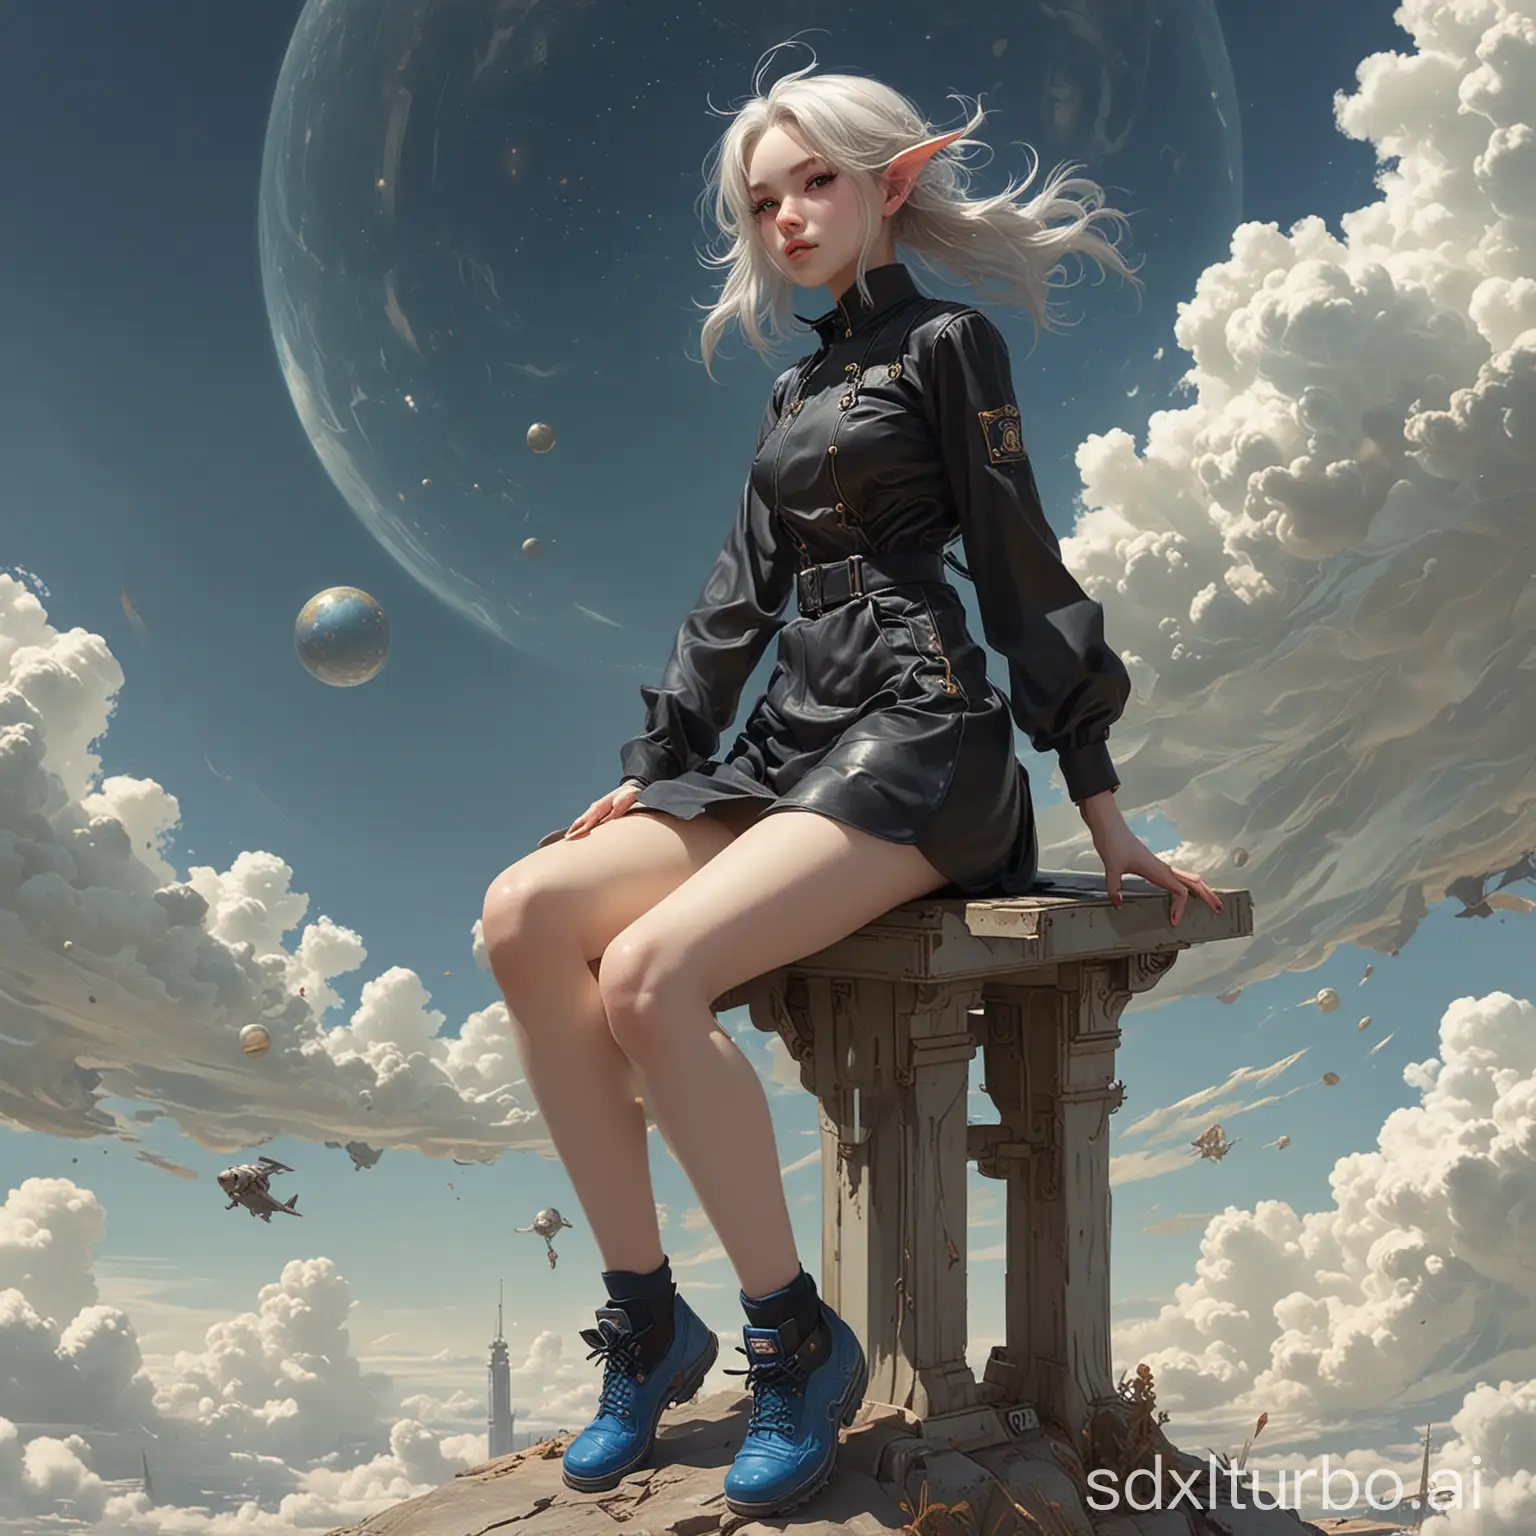 ethereal fantasy concept art of  a Bunny girl with a blue shoe and a black tight_shirt and a white background,<lora:可爱机甲:0.6>,<lora:Chromatic_Taleweaver:0.2>,<lora:Miho Hirano:0.1>,panorama,landscape,incredibly absurdres,huge filesize,science fiction,artbook,((dieselpunk)),personification,cosplay,boy,kawaii,wide_shot,. magnificent,celestial,ethereal,painterly,epic,majestic,magical,fantasy art,cover art,dreamy,<lora:shouban_20240216142544:0.3>,<lora:Niji3D:0.0>